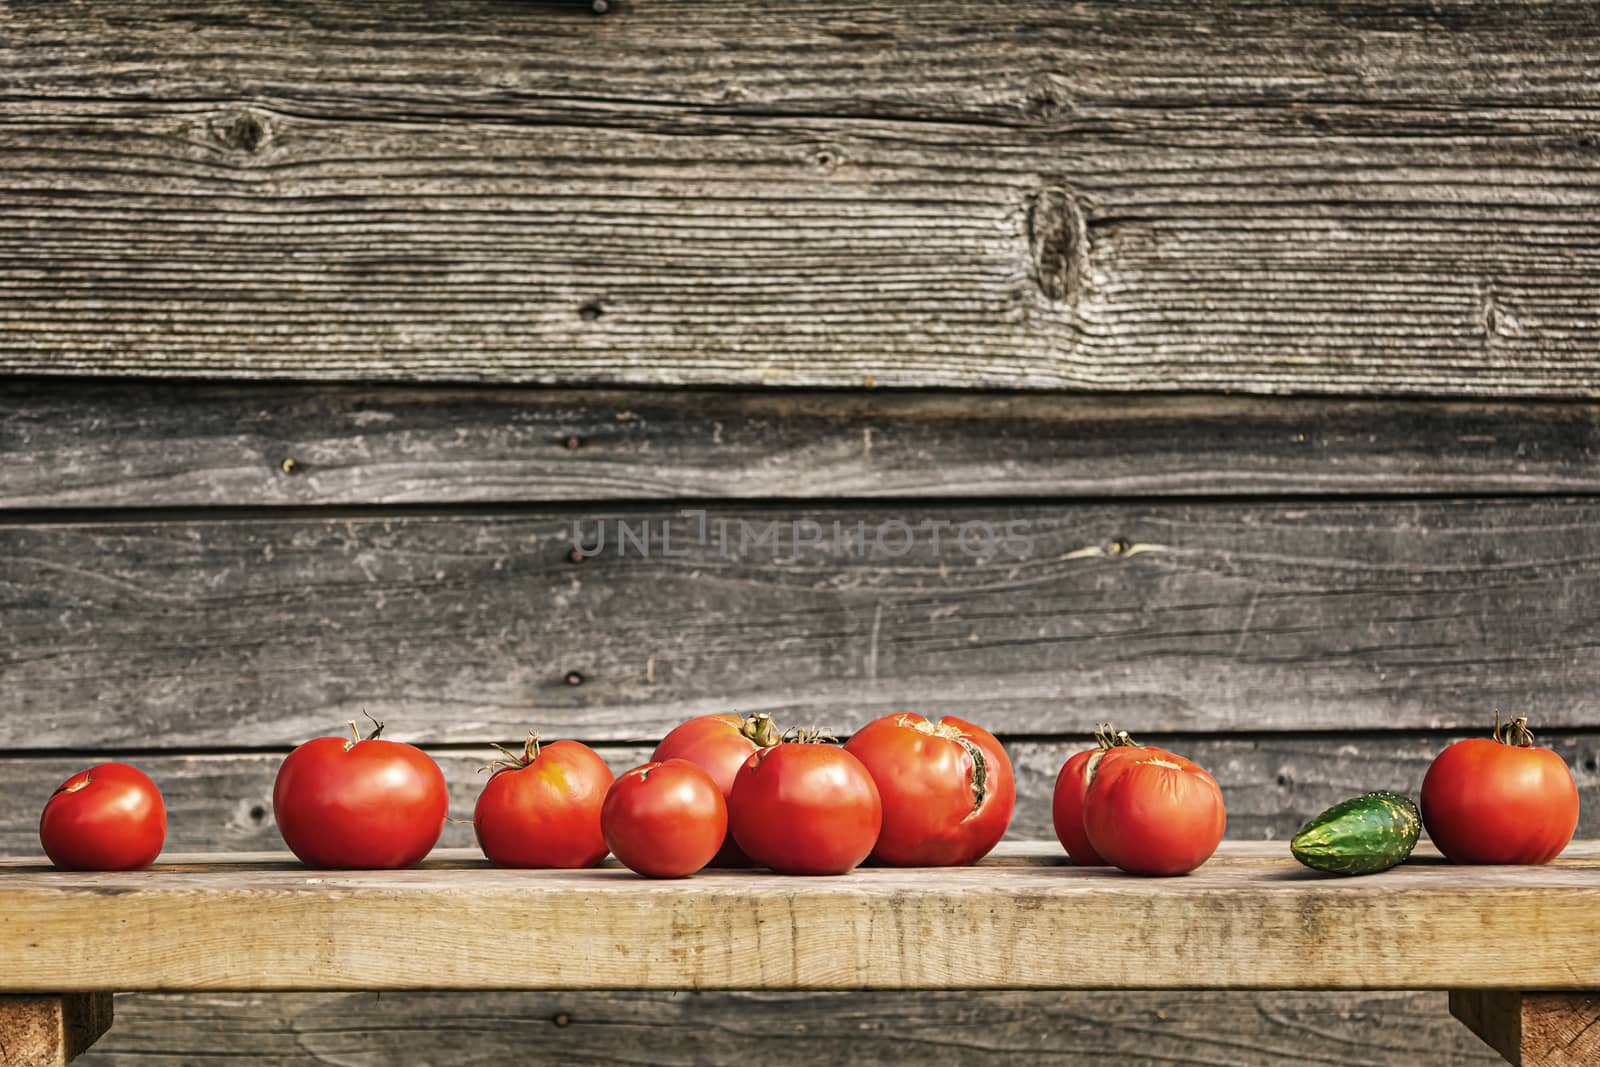 Row of tomatoes on a bench against wooden background